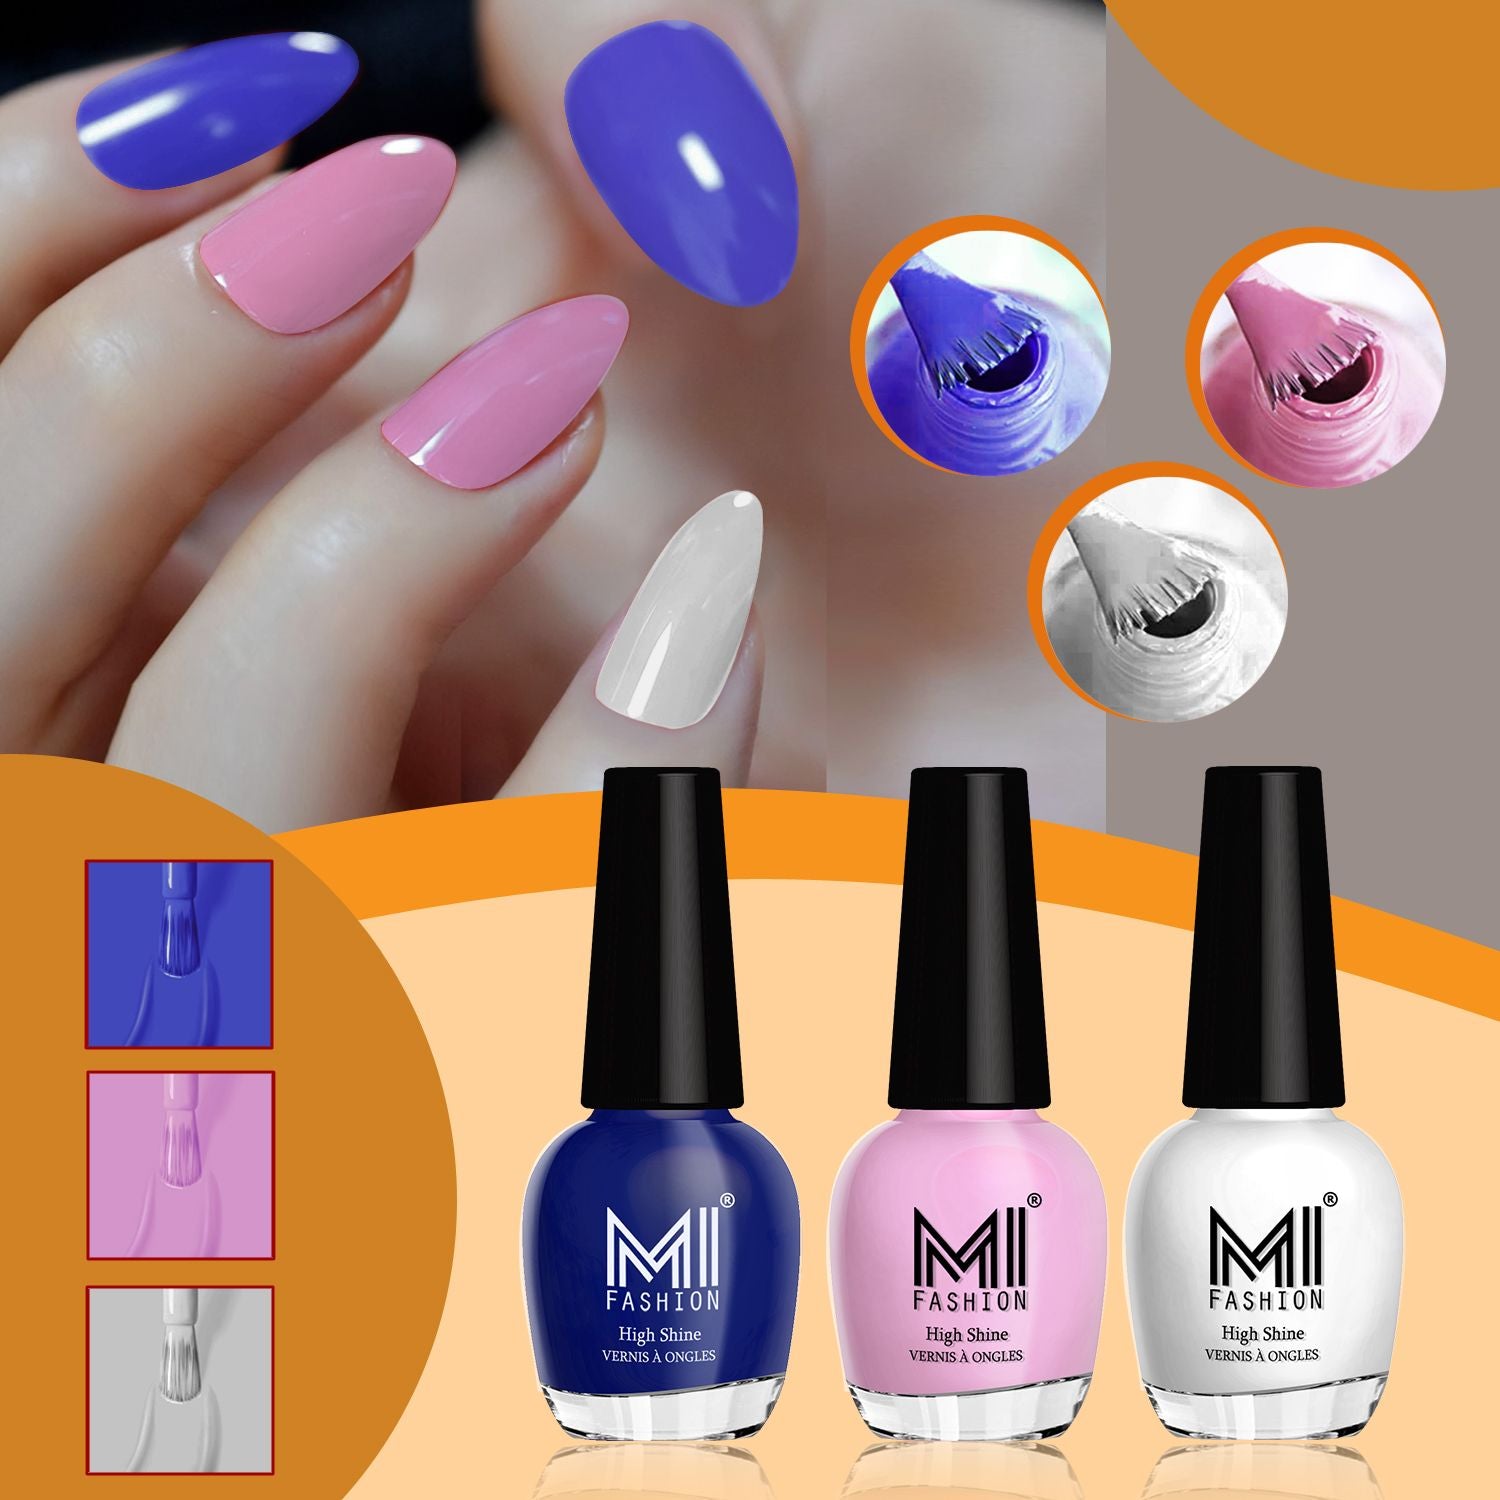 MI Fashion Nail Polish Kit Glossy Shades for a Glam Look Pack of 3 (15ML each)(Royal Blue,Nude Pink,Milky White)